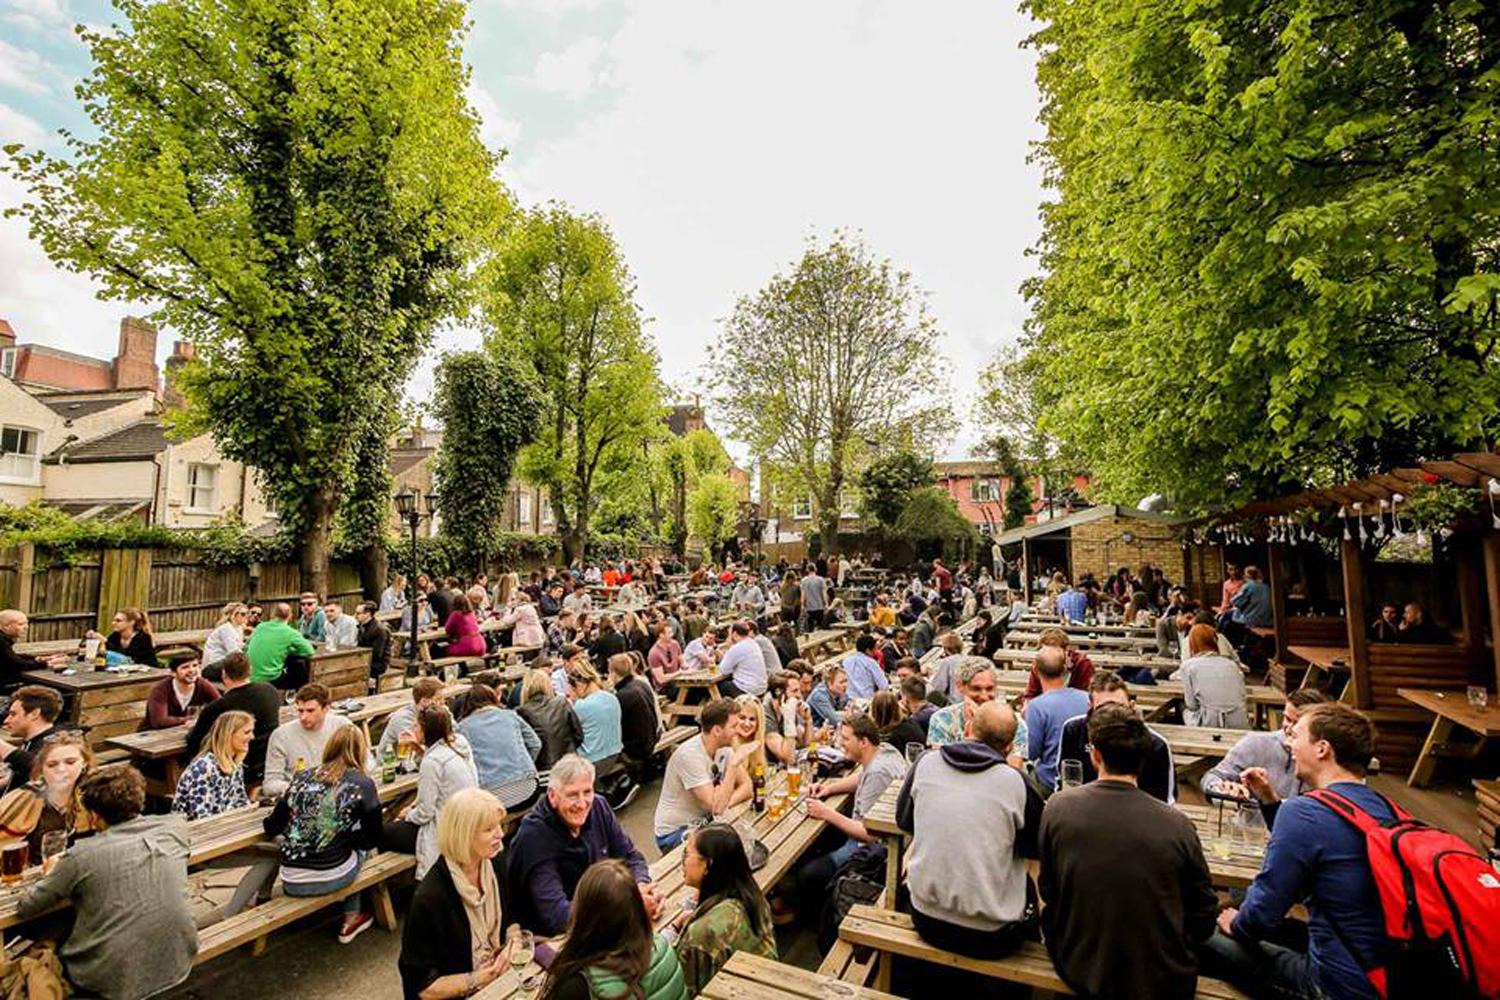 What to do in london in spring